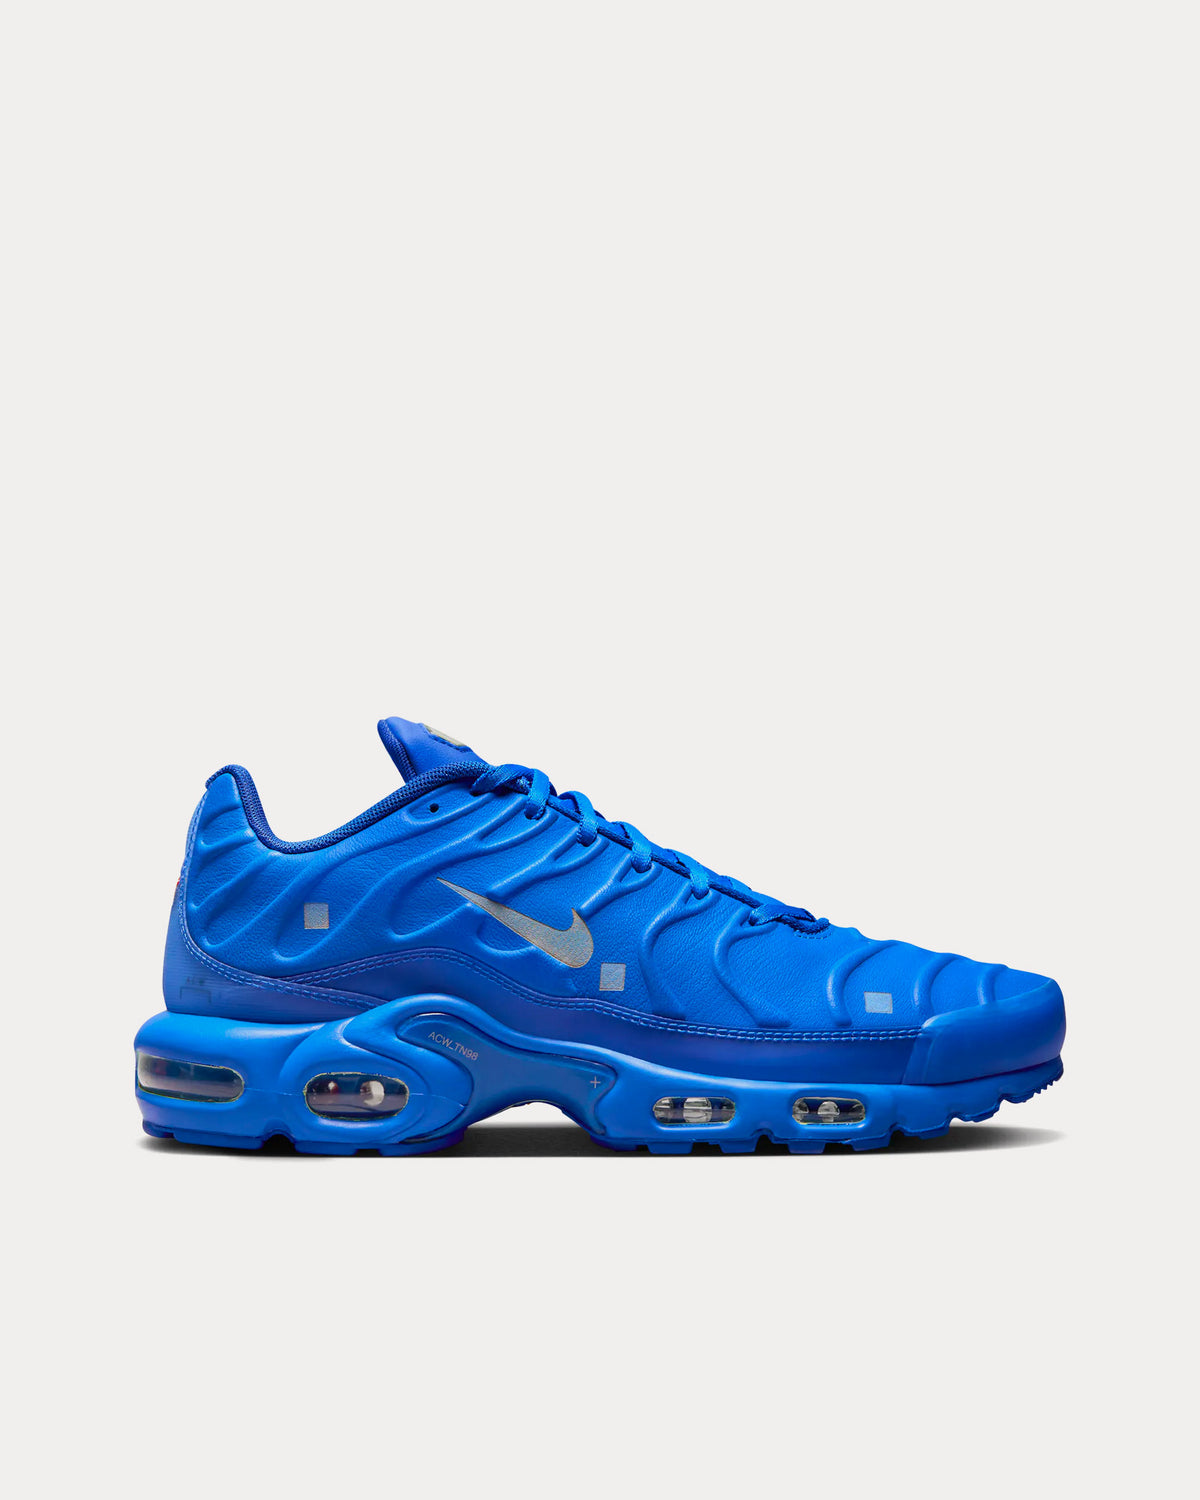 Nike x A-COLD-WALL* Air Max Plus 98 Blue Low Top Sneakers - Sneak in Peace